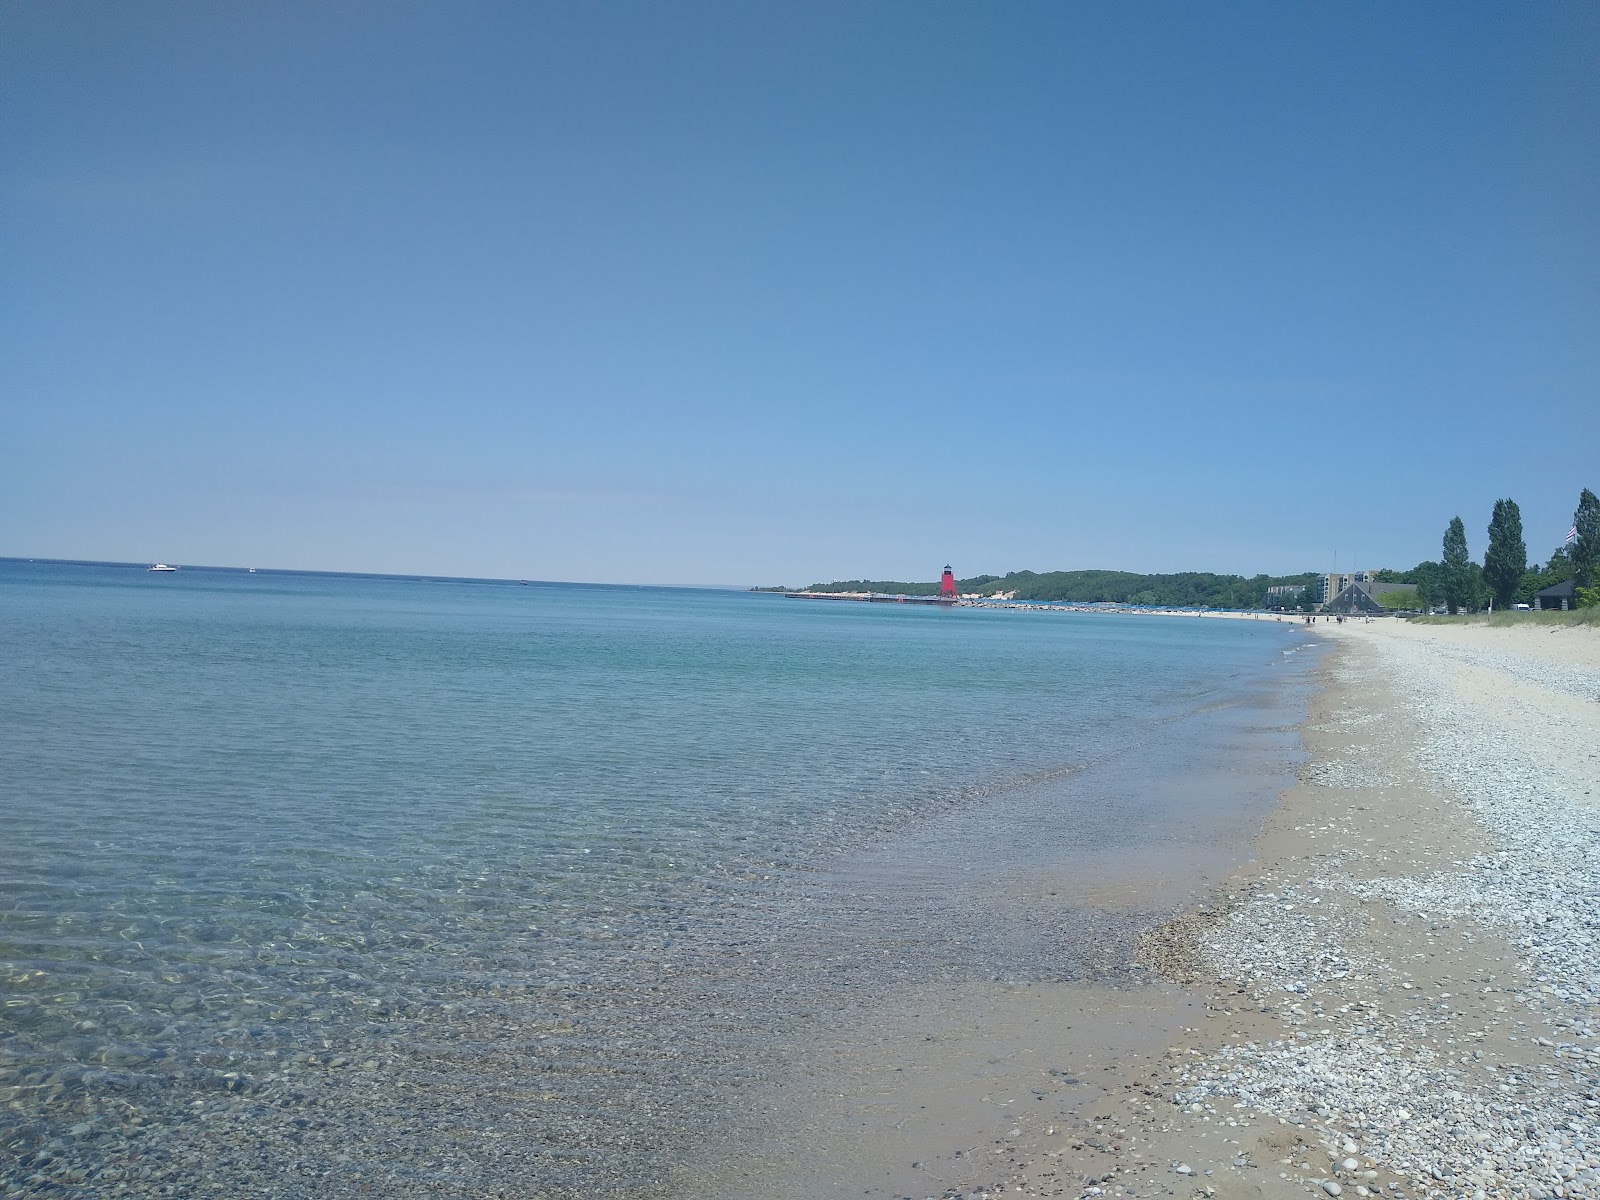 Photo of Michigan Beach Park and the settlement